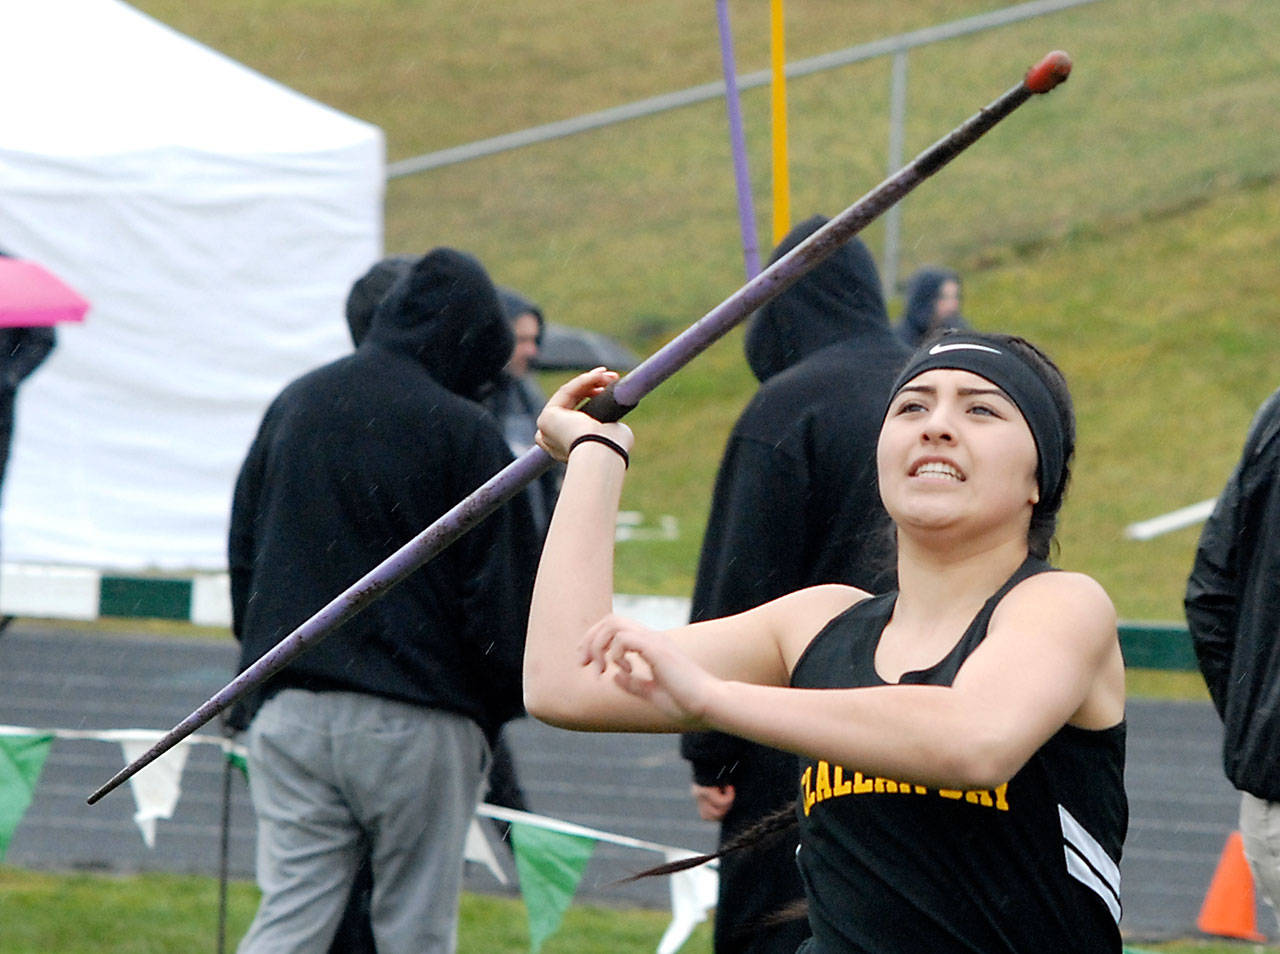 Keith Thorpe/Peninsula Daily News Mariah LaChester of Clallam Bay competes in girls javelin during Friday’s Port Angeles Invitational meet at Port Angeles High School.